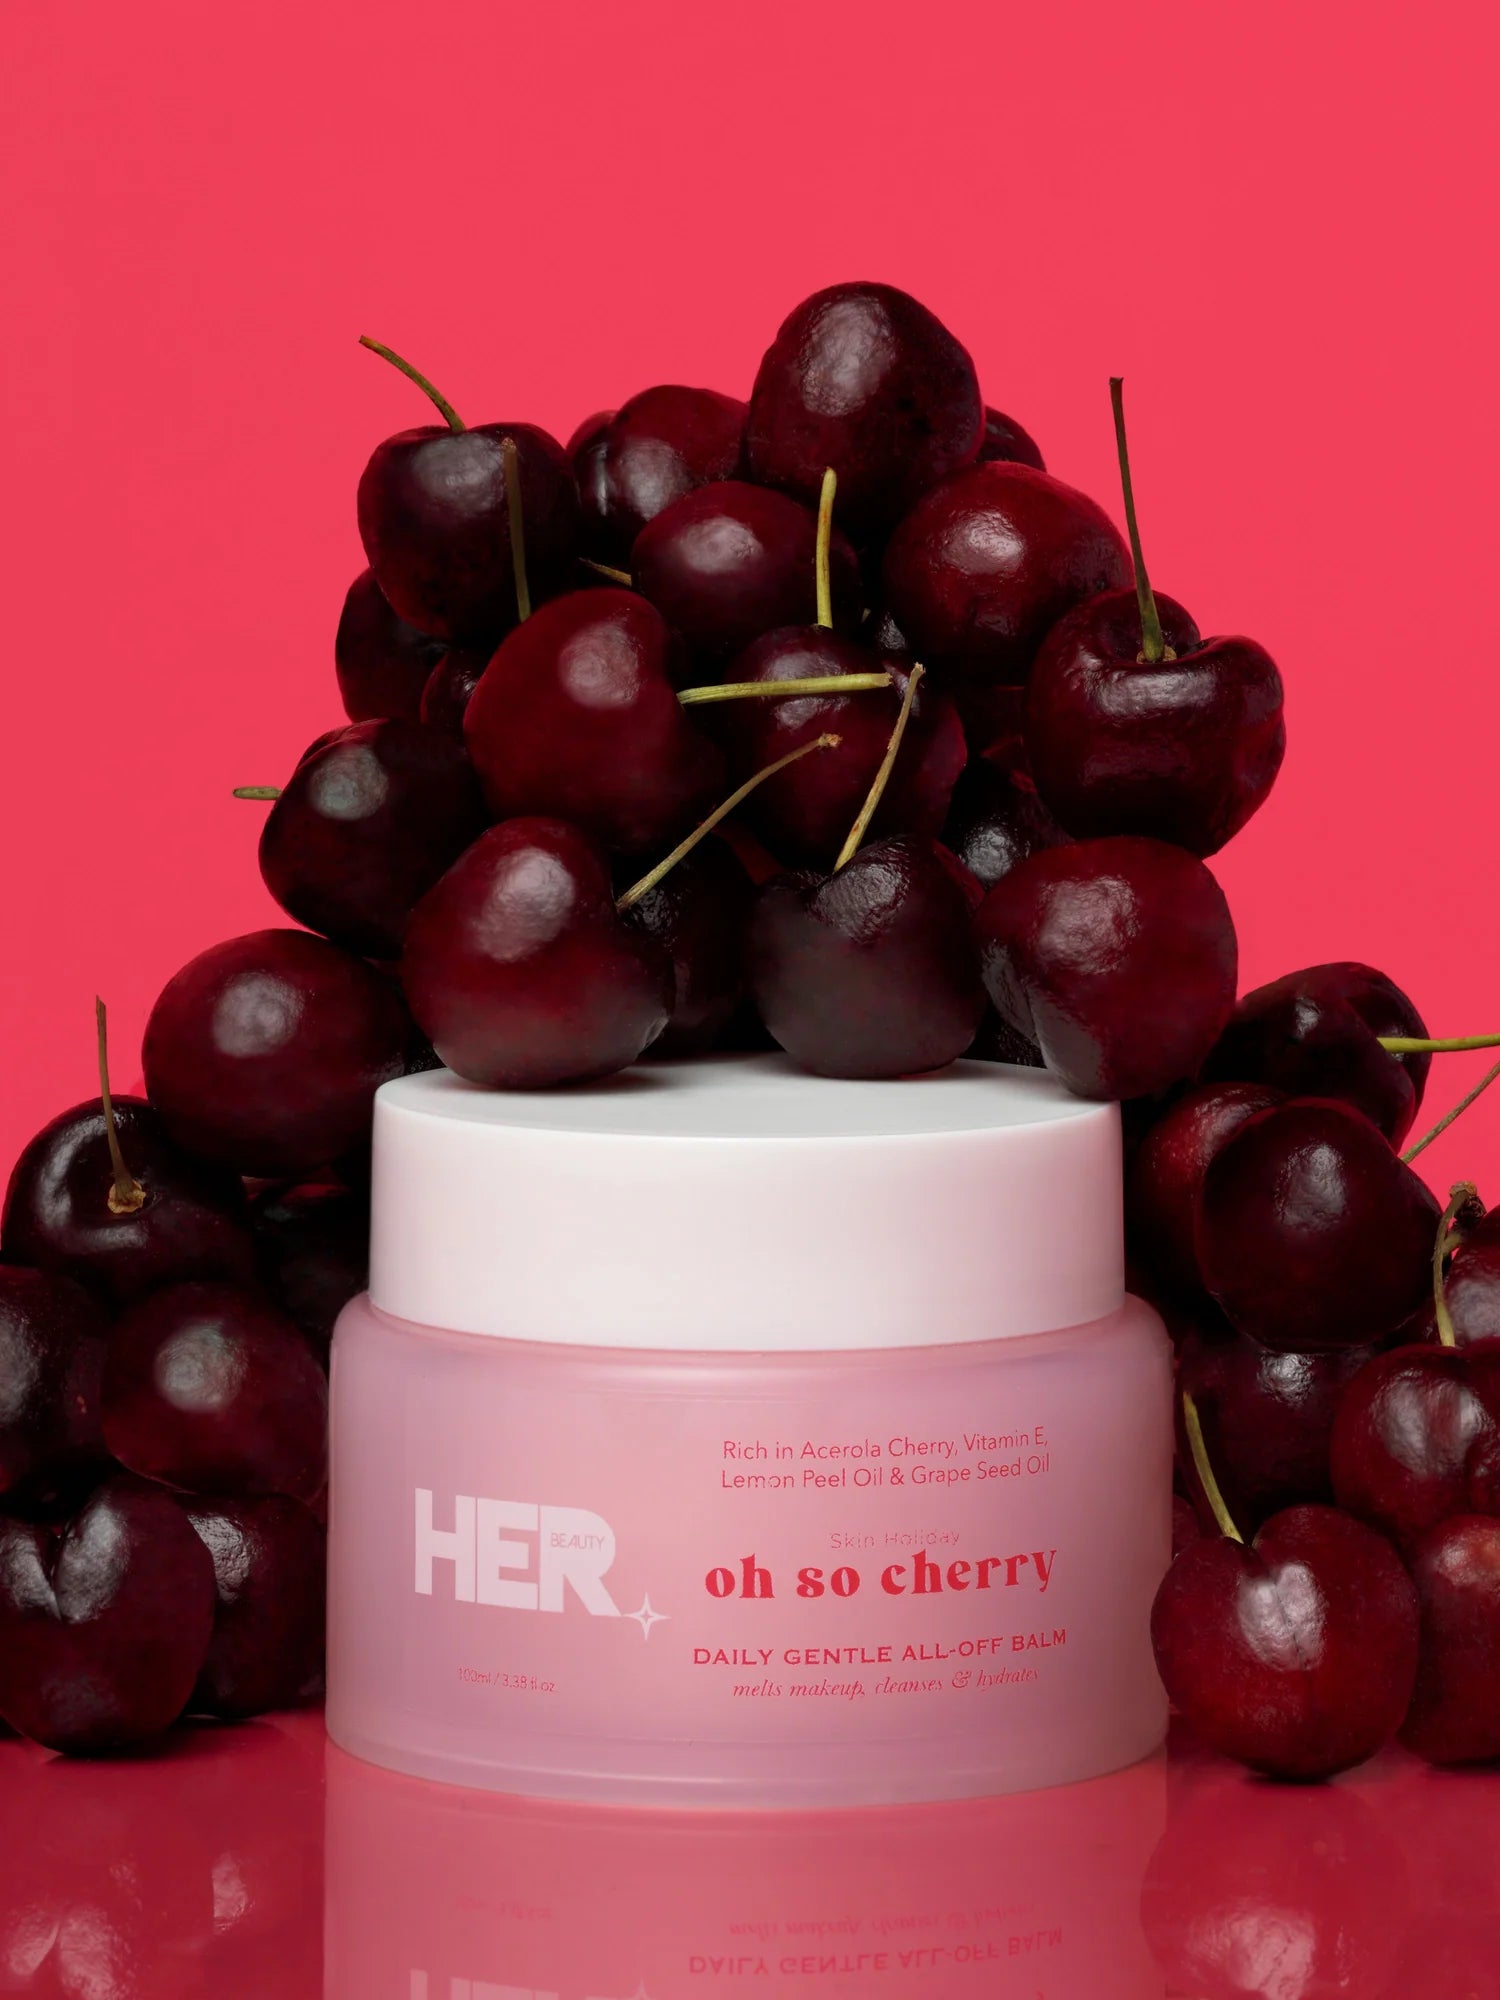 Her Beauty Oh So Cherry Daily Gentle ALL-OFF Balm